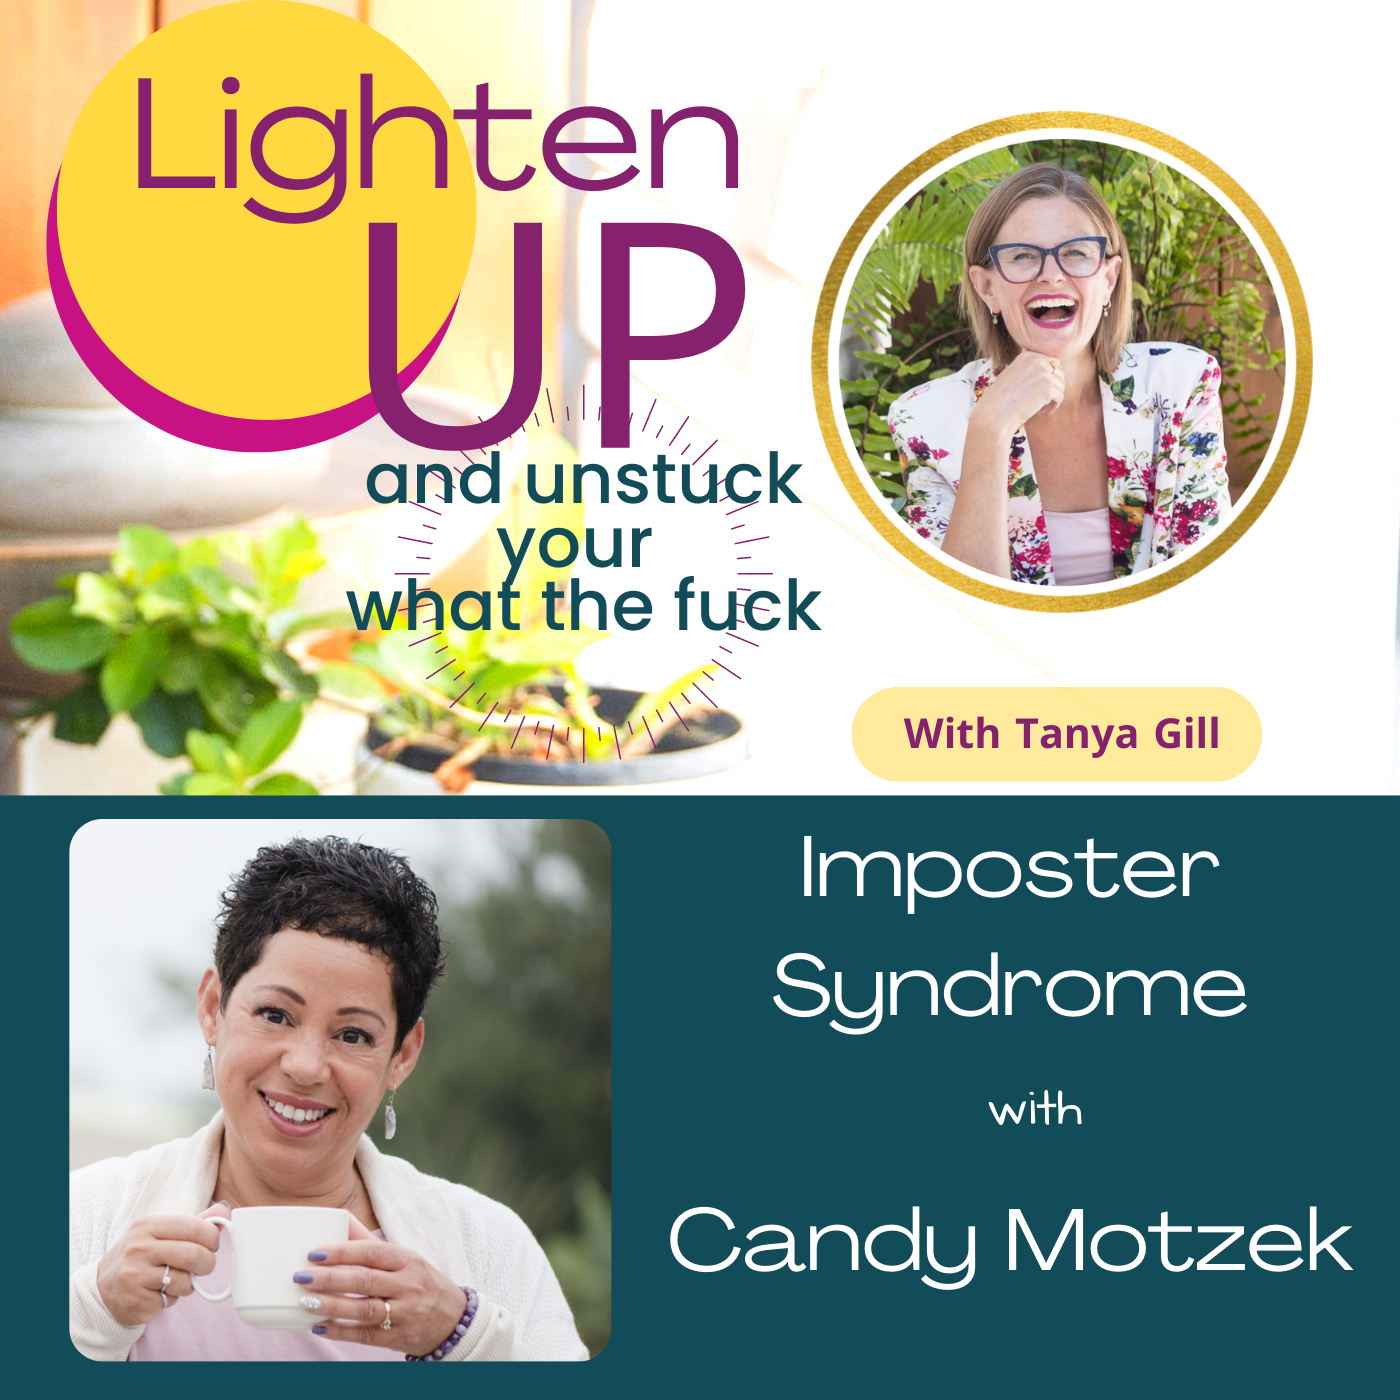 Imposter Syndrome – with Candy Motzek